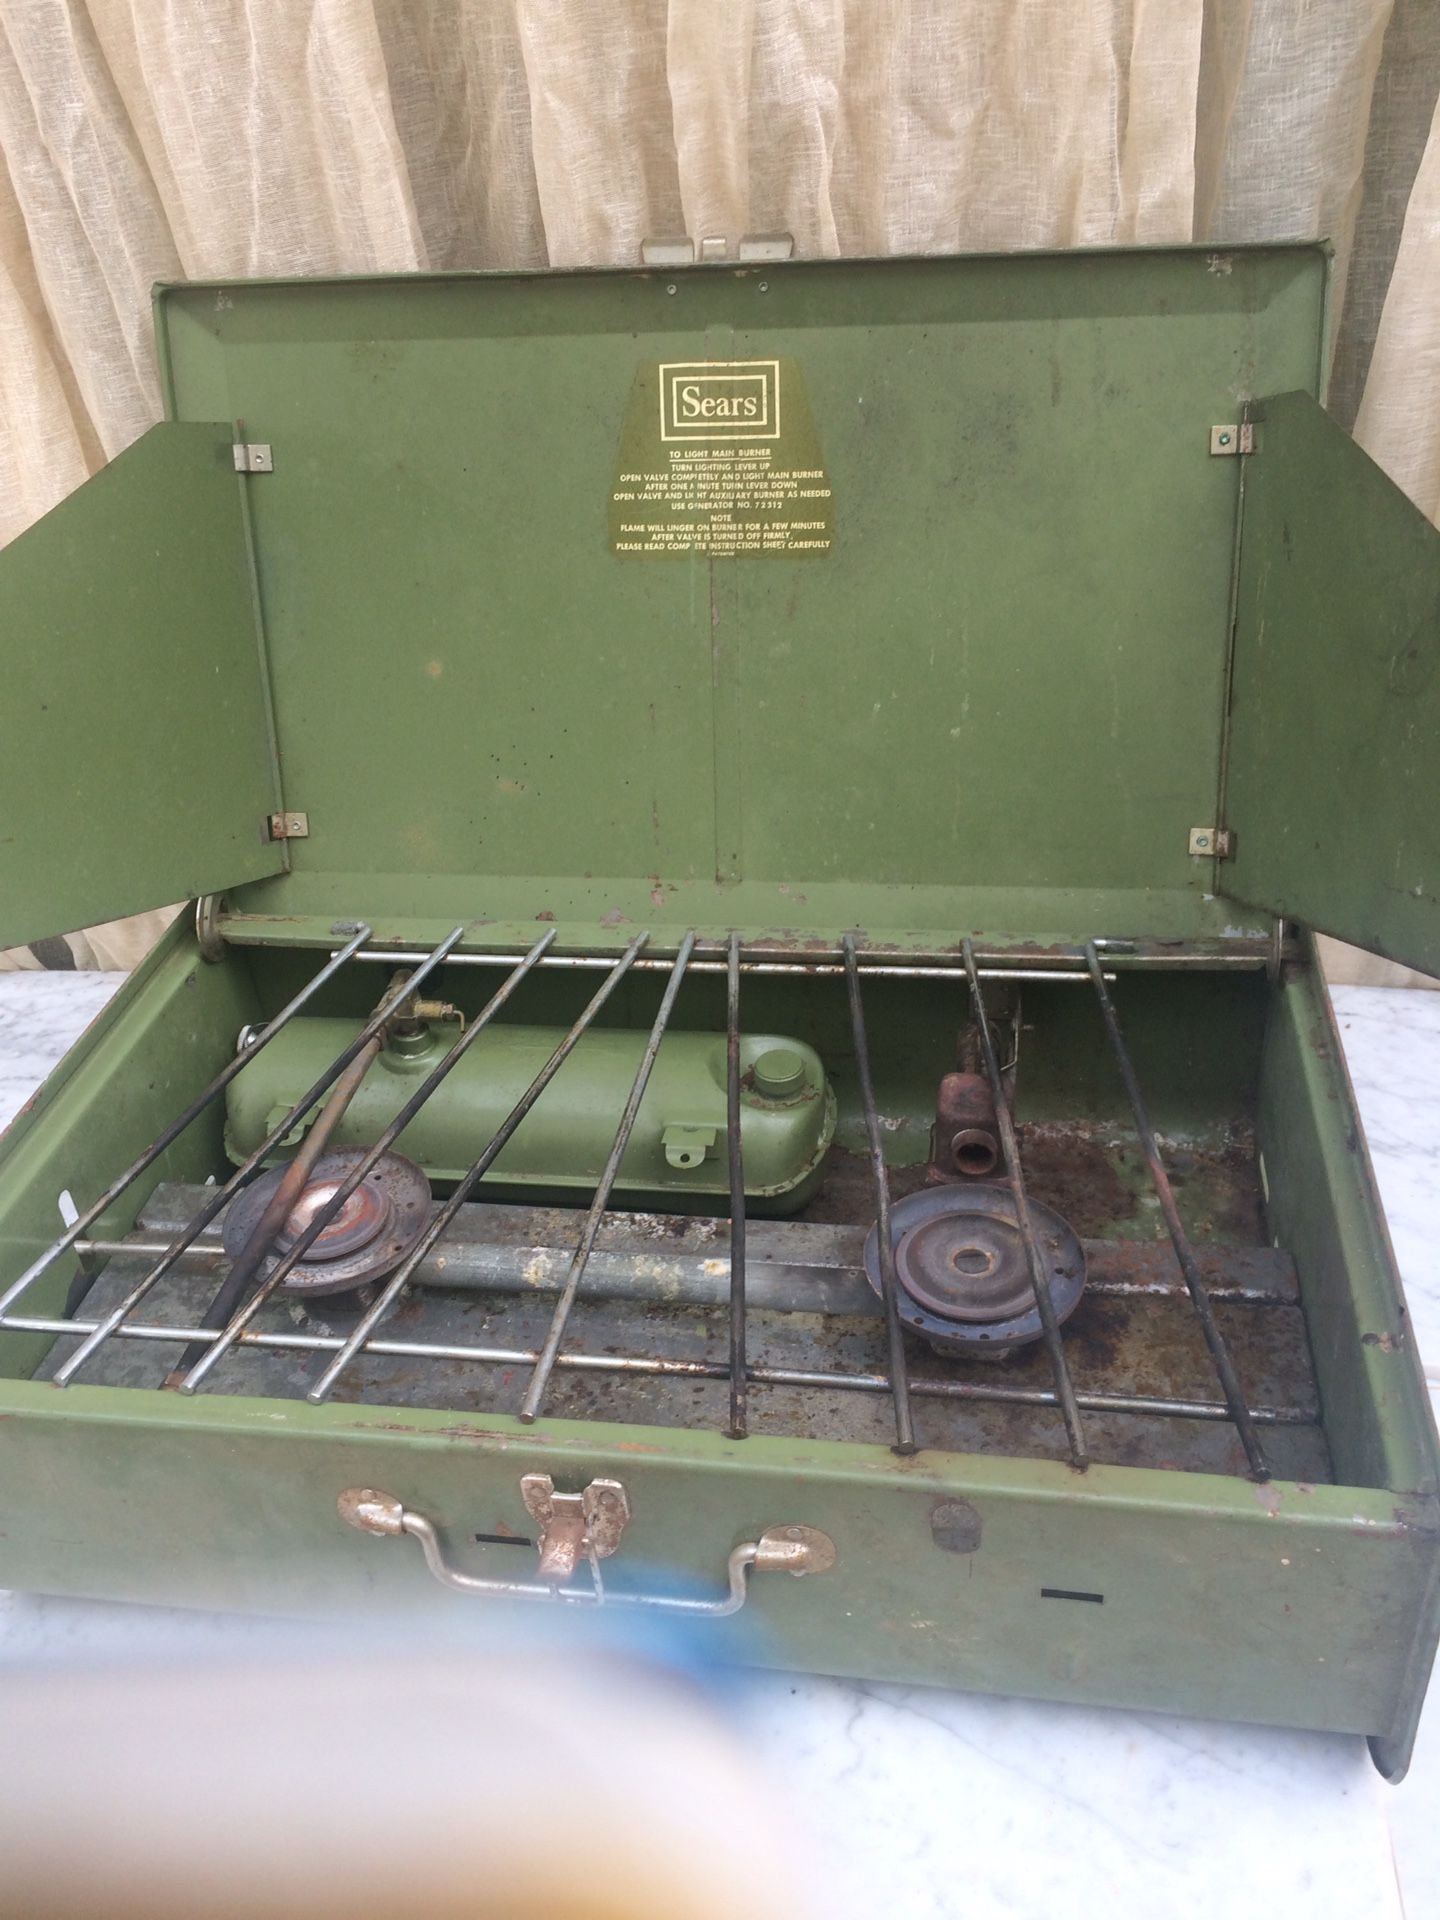 (8) VNG sears camp stove